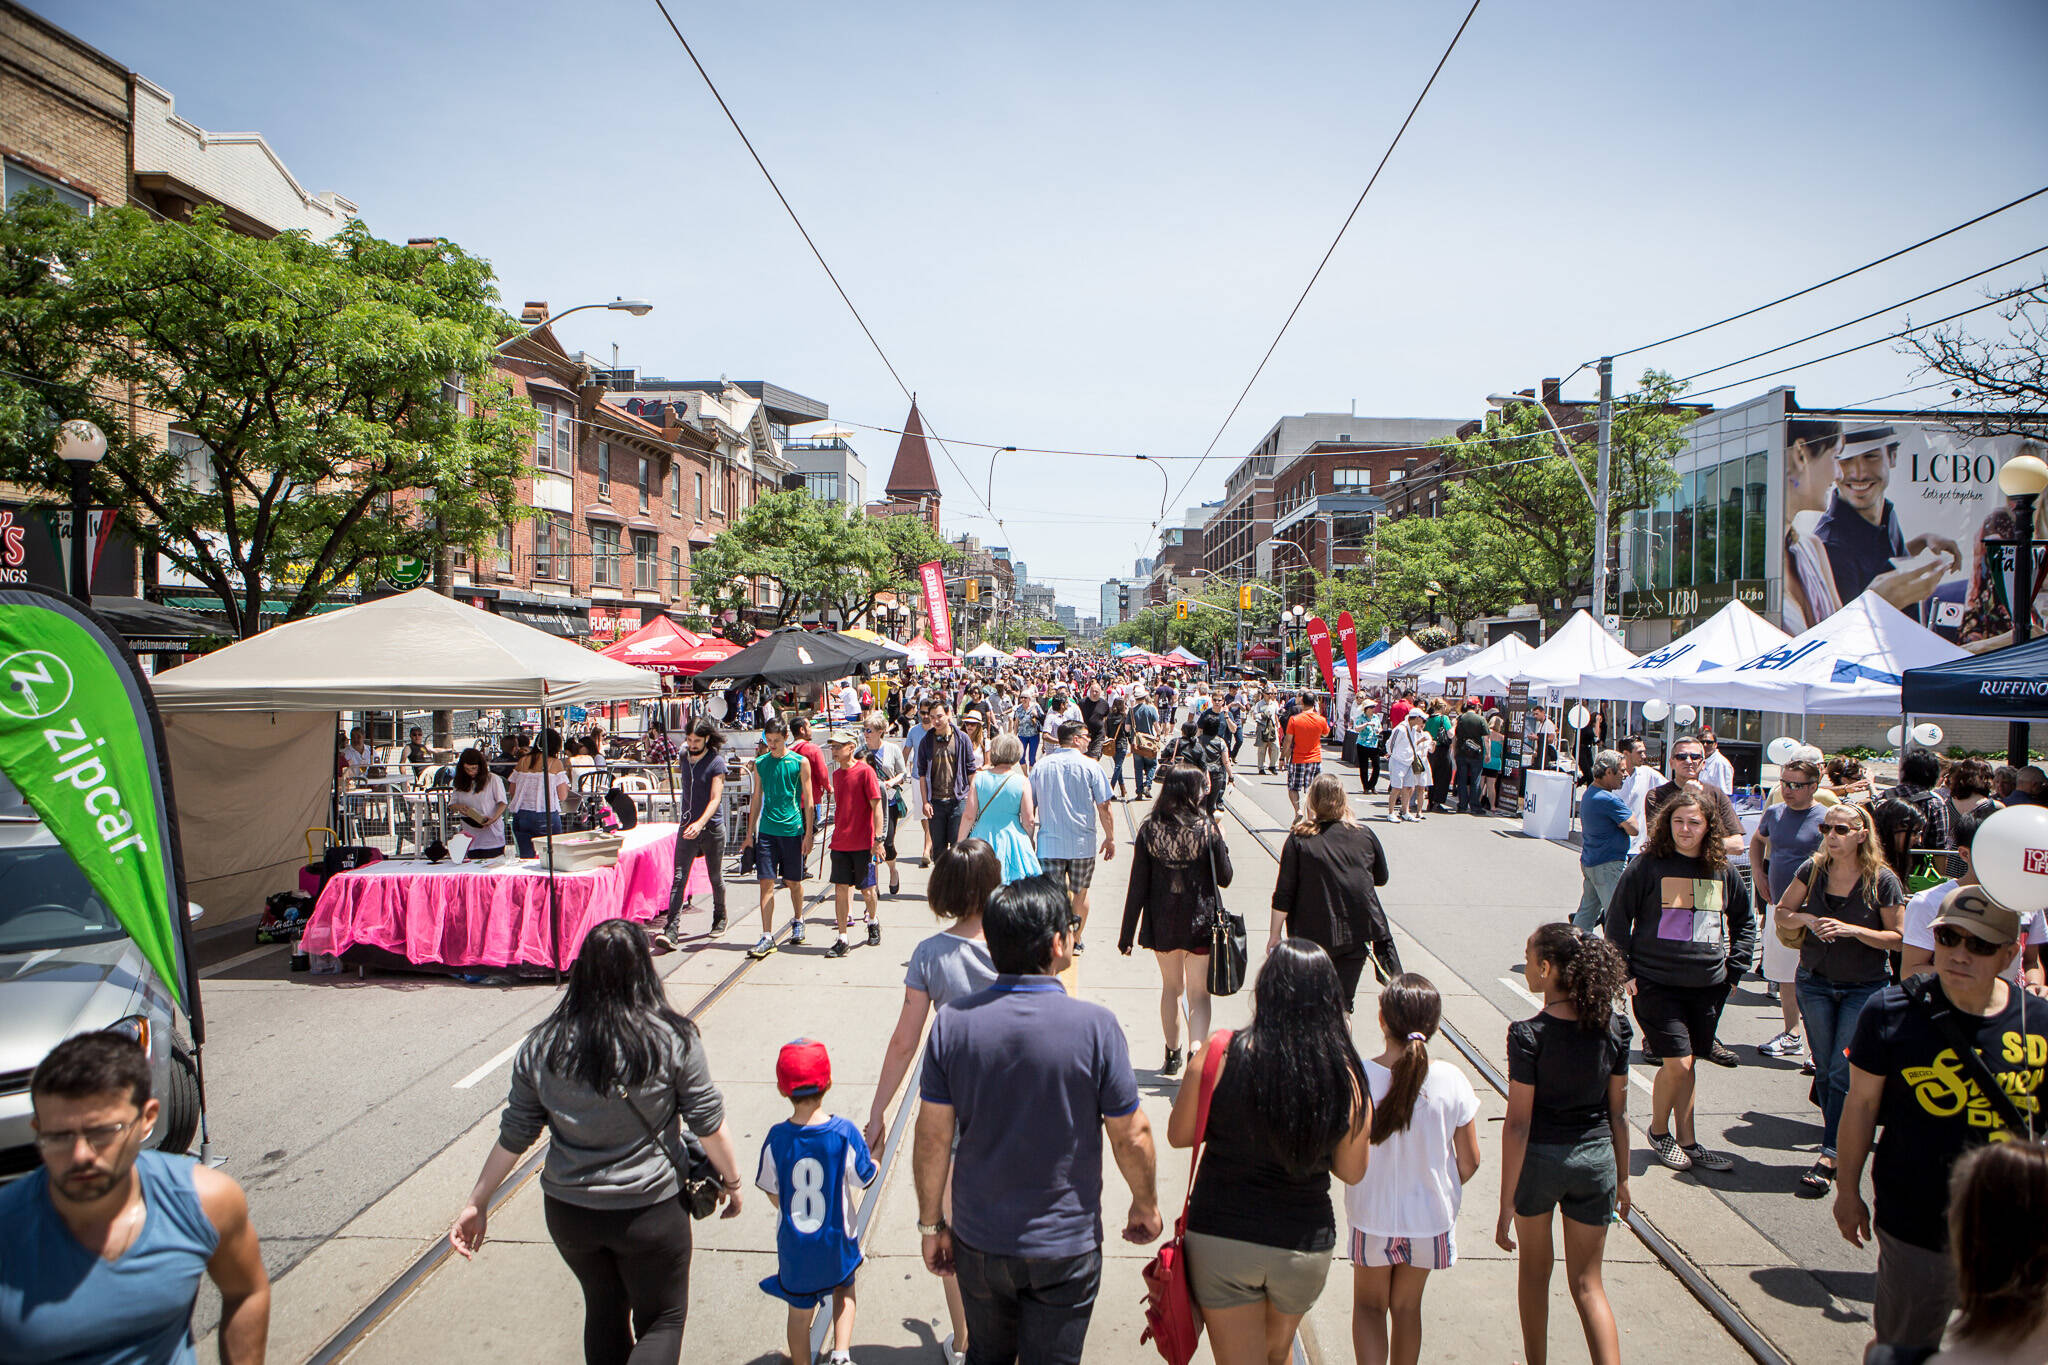 things to do in toronto this weekend